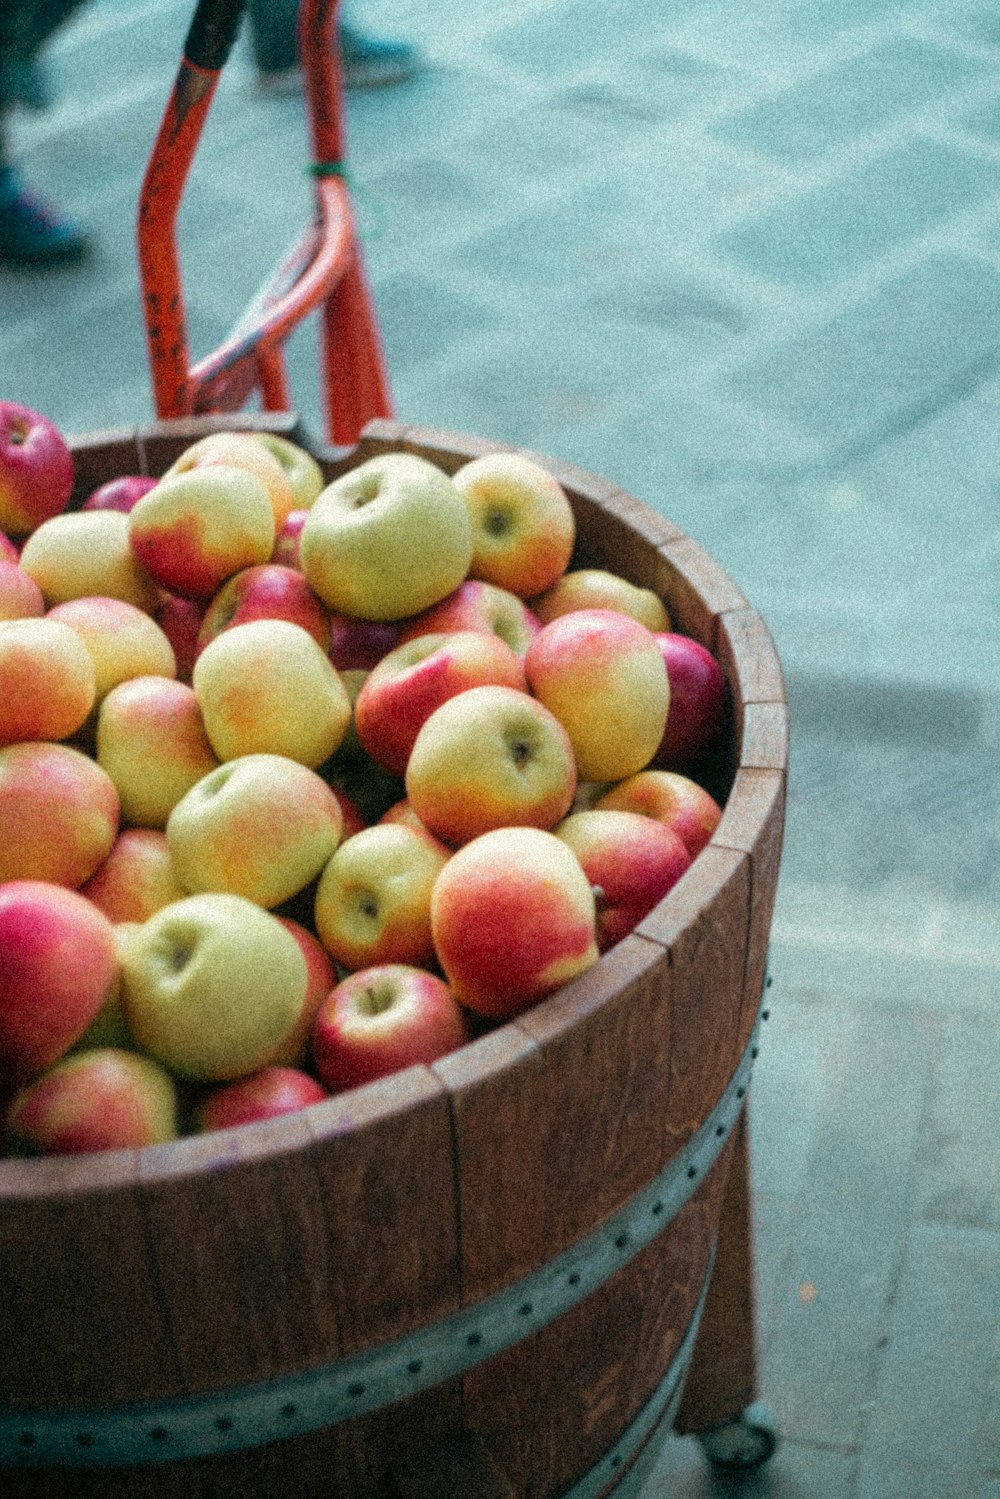 a wooden barrel filled with lots of red and yellow apples